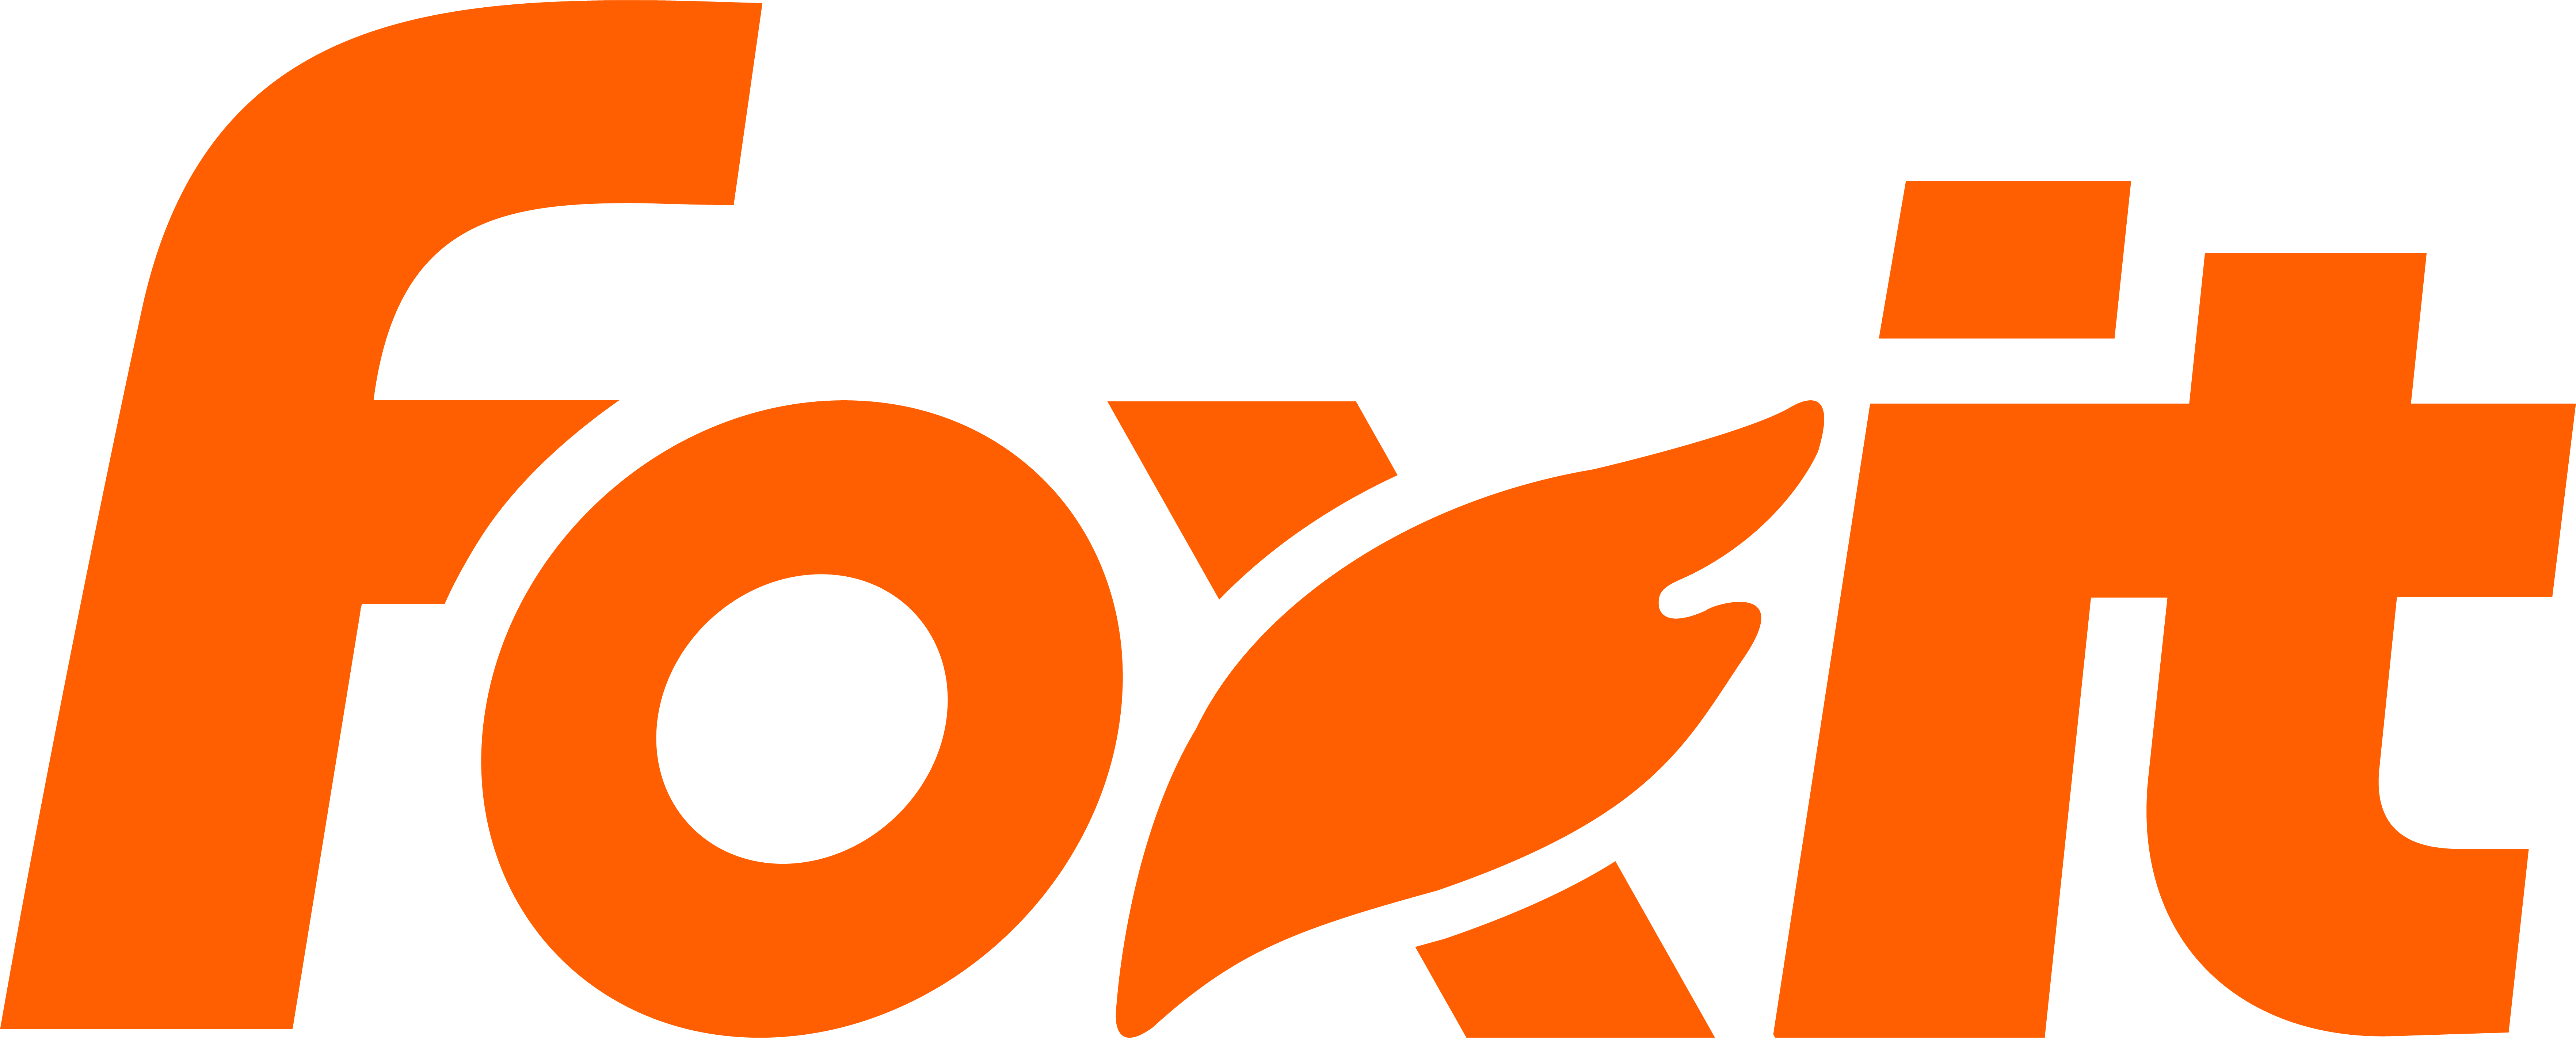 New Foxit Logo Makes a Statement